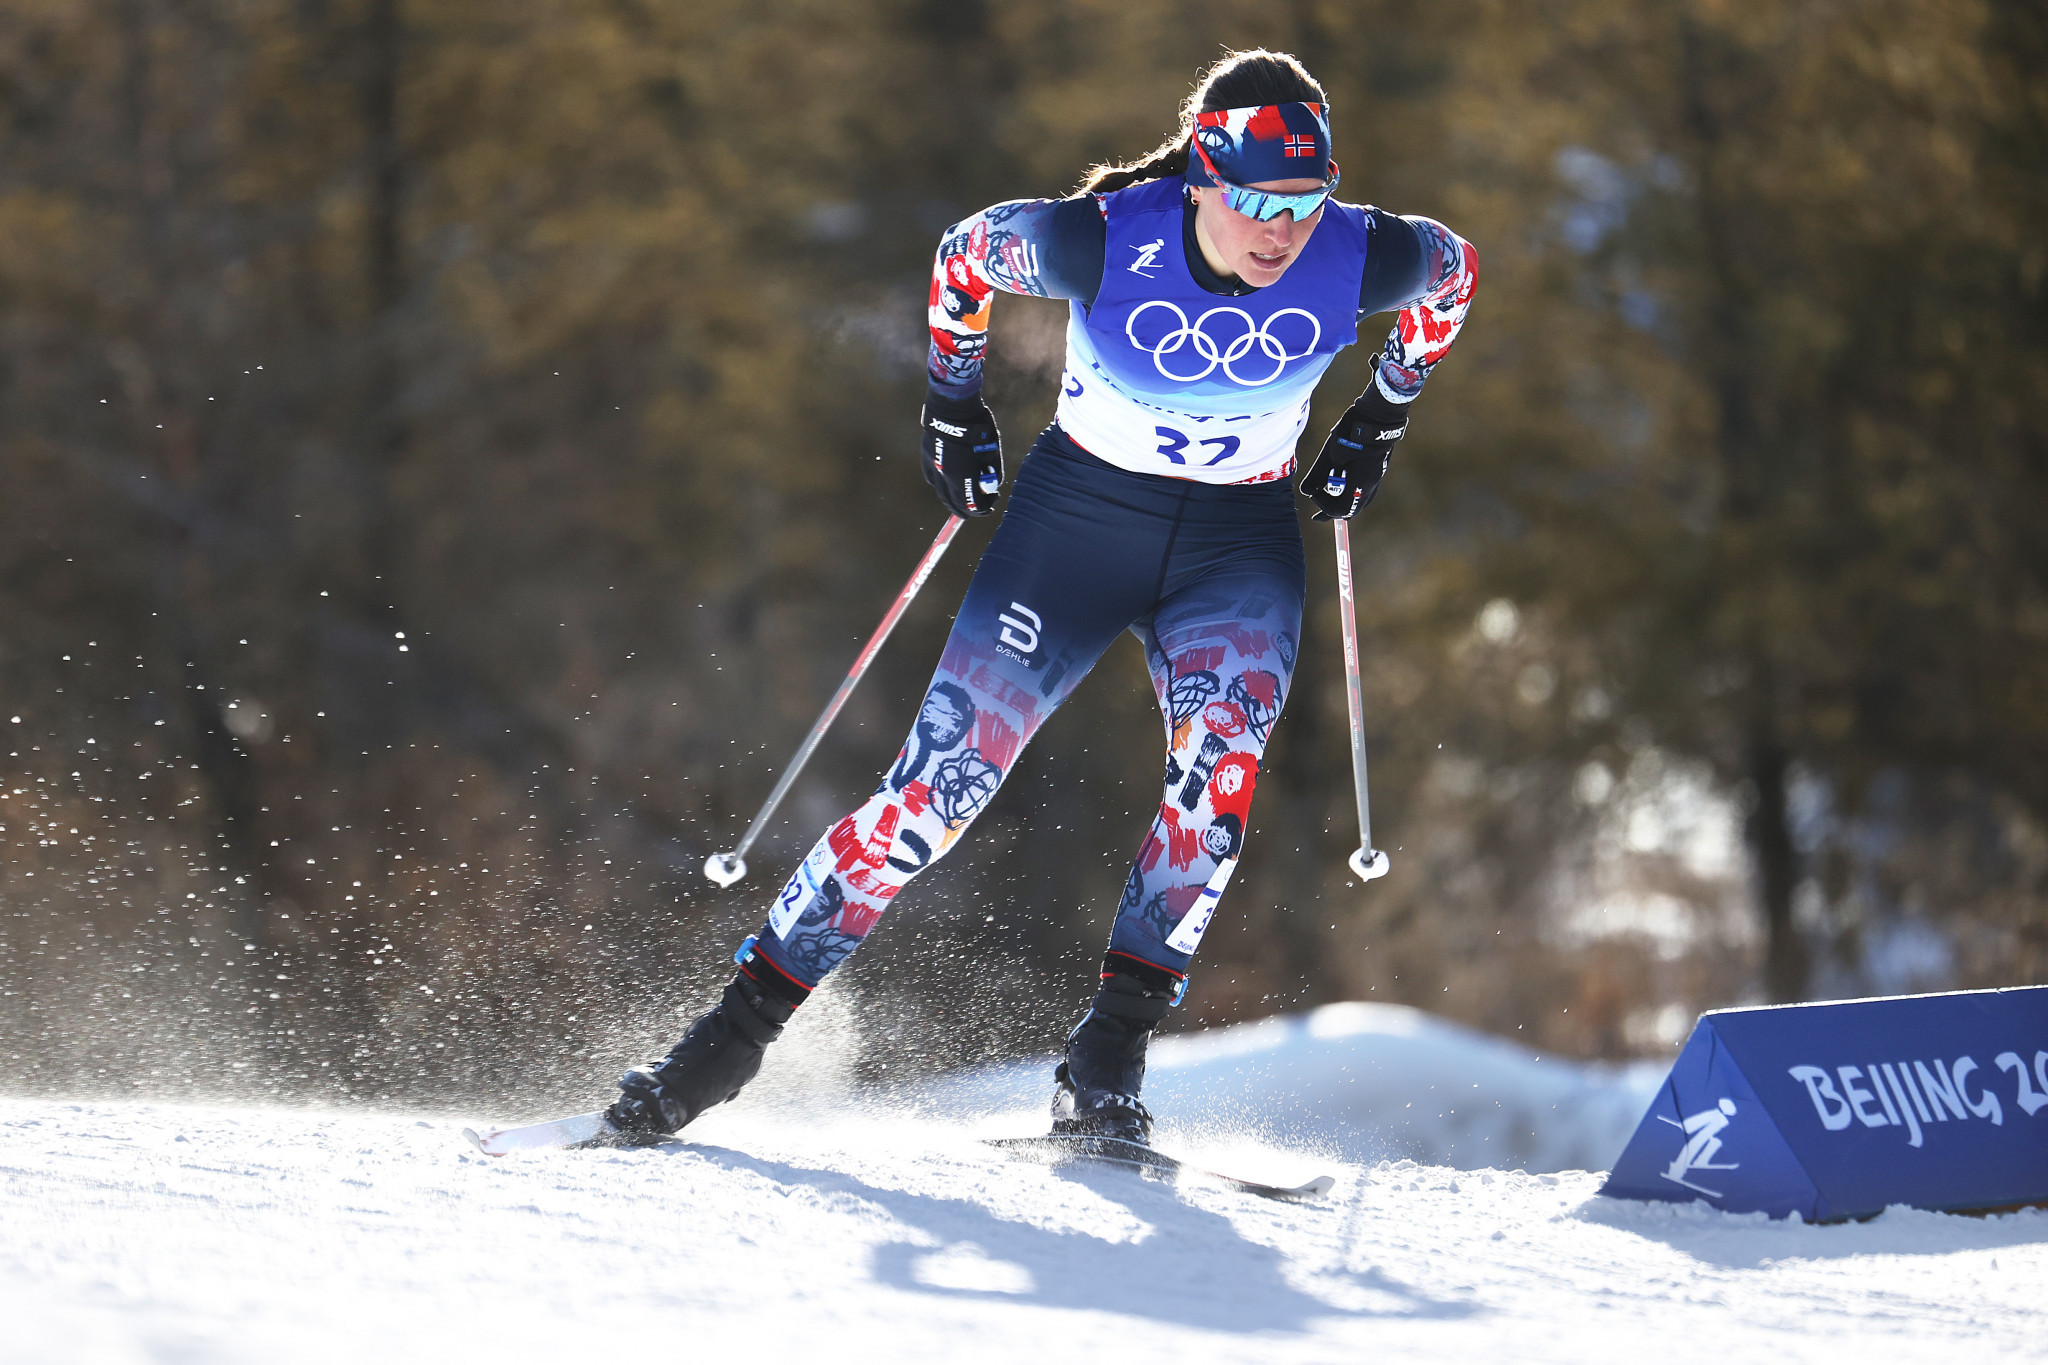 Lotta Udnes Weng was part of the victorious Norway team today ©Getty Images